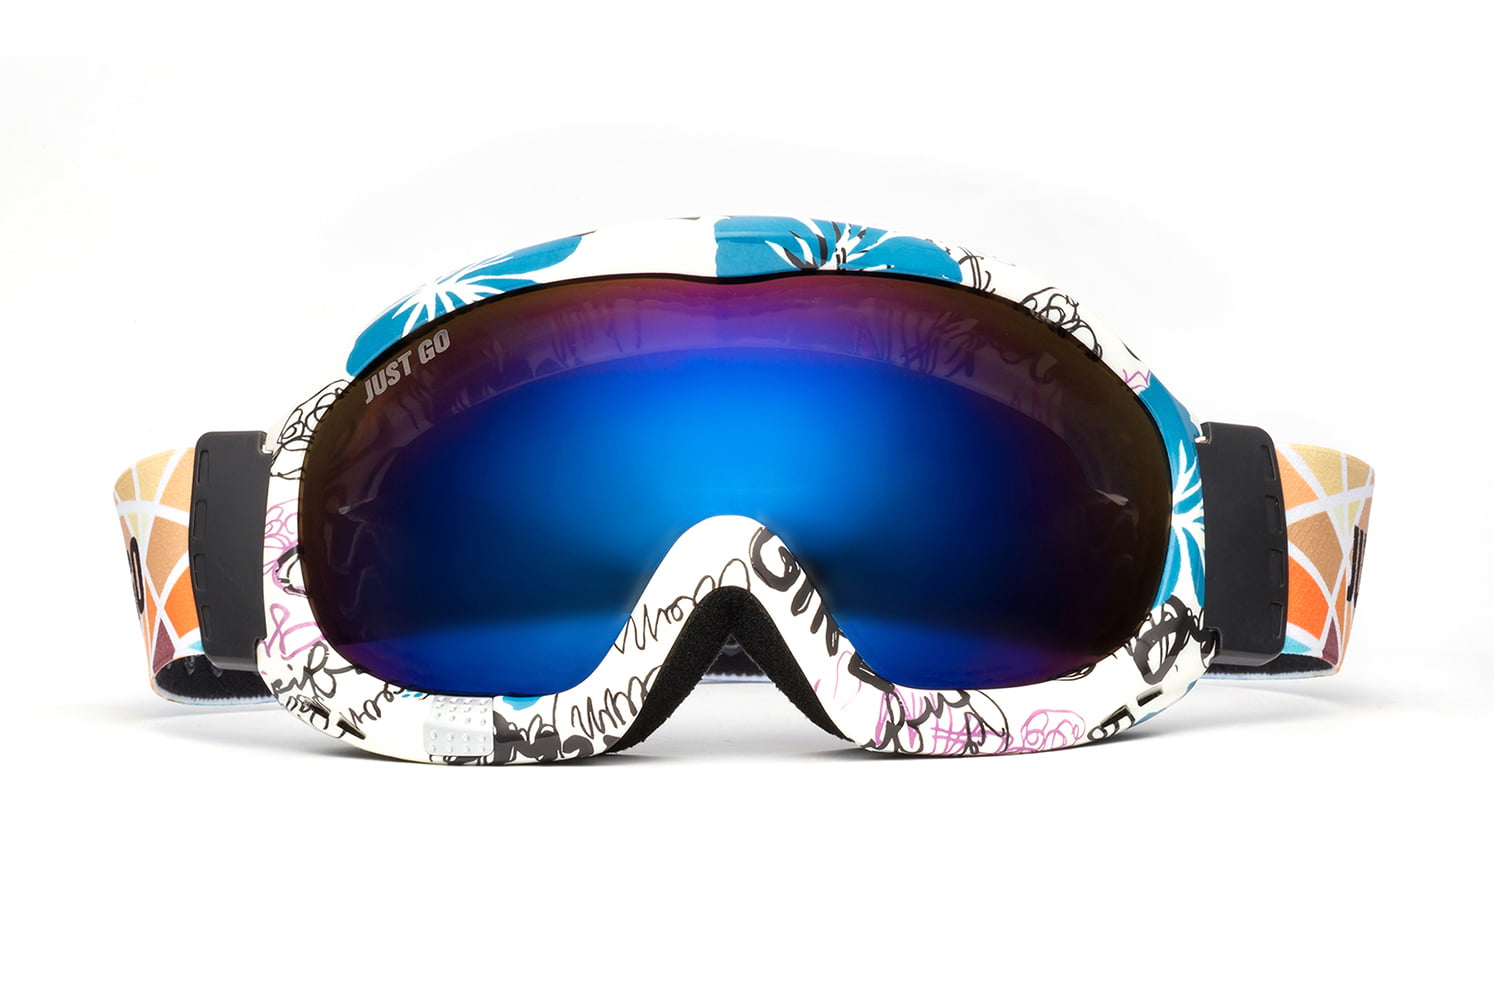 Ski Goggles Winter Snow Sports Goggles With Anti-fog UV Protection For Skiing 